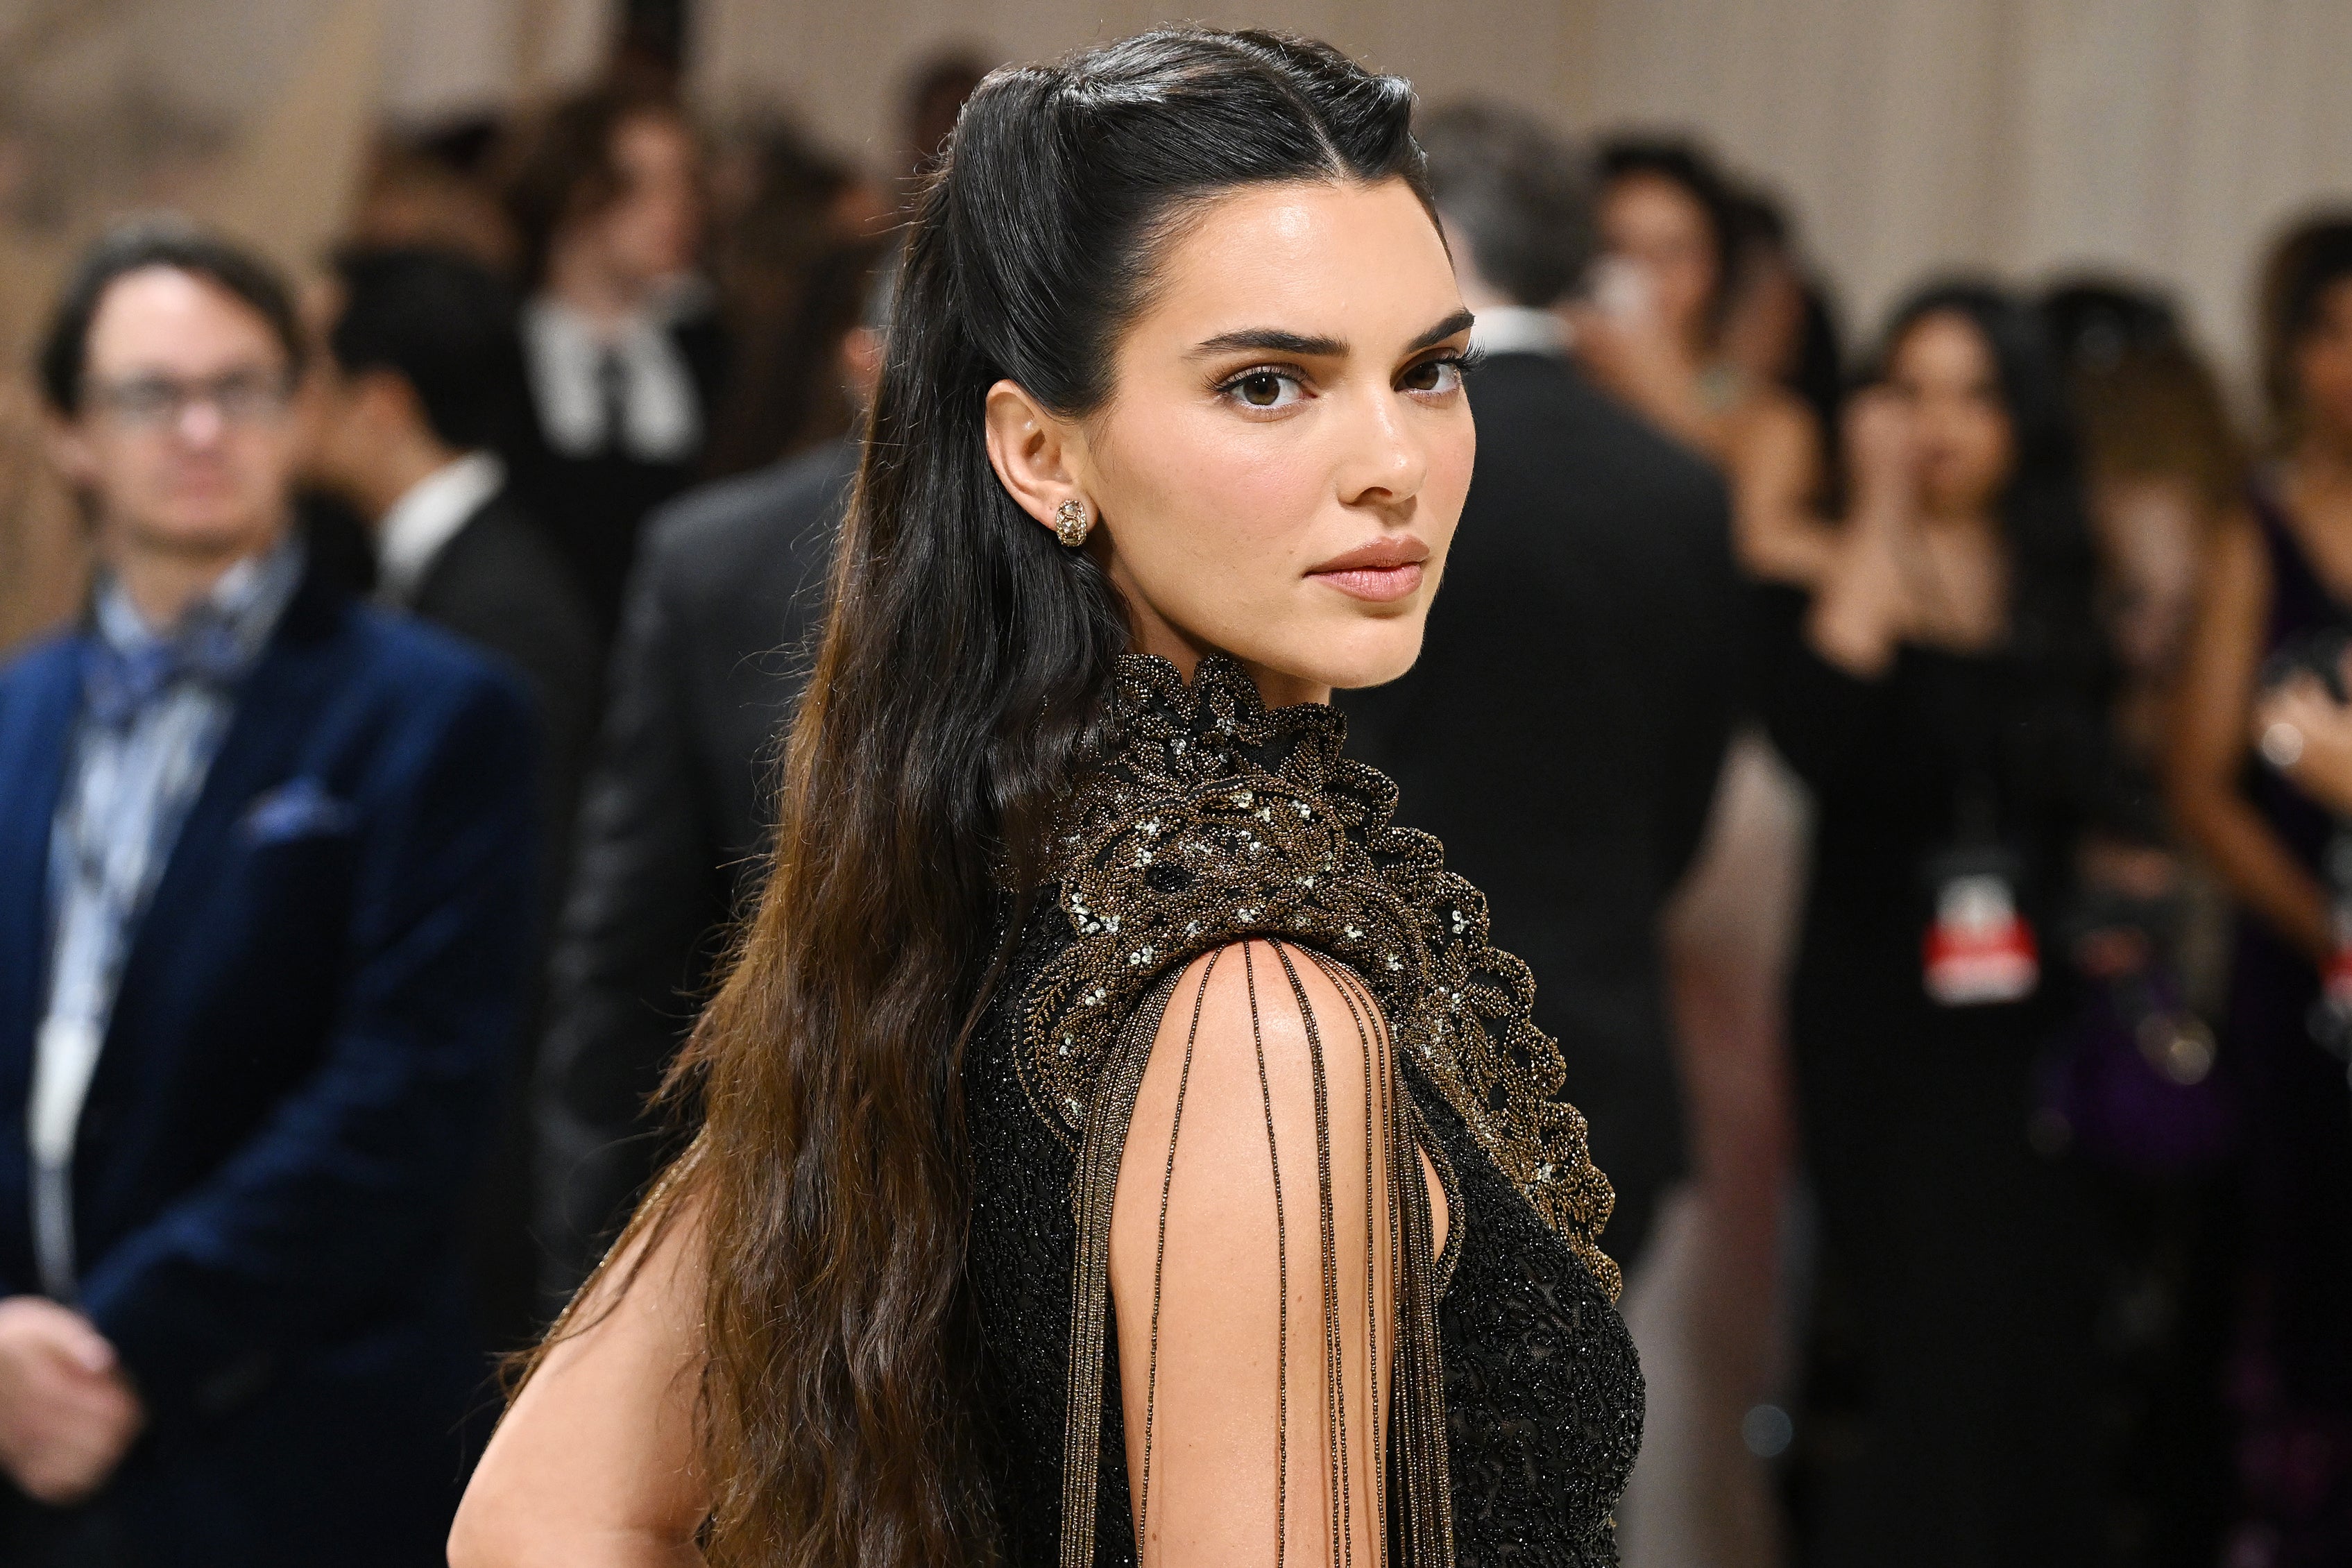 Here's What's Happening With People Claiming Winona Ryder Previously Wore Kendall Jenner's Met Gala Dress